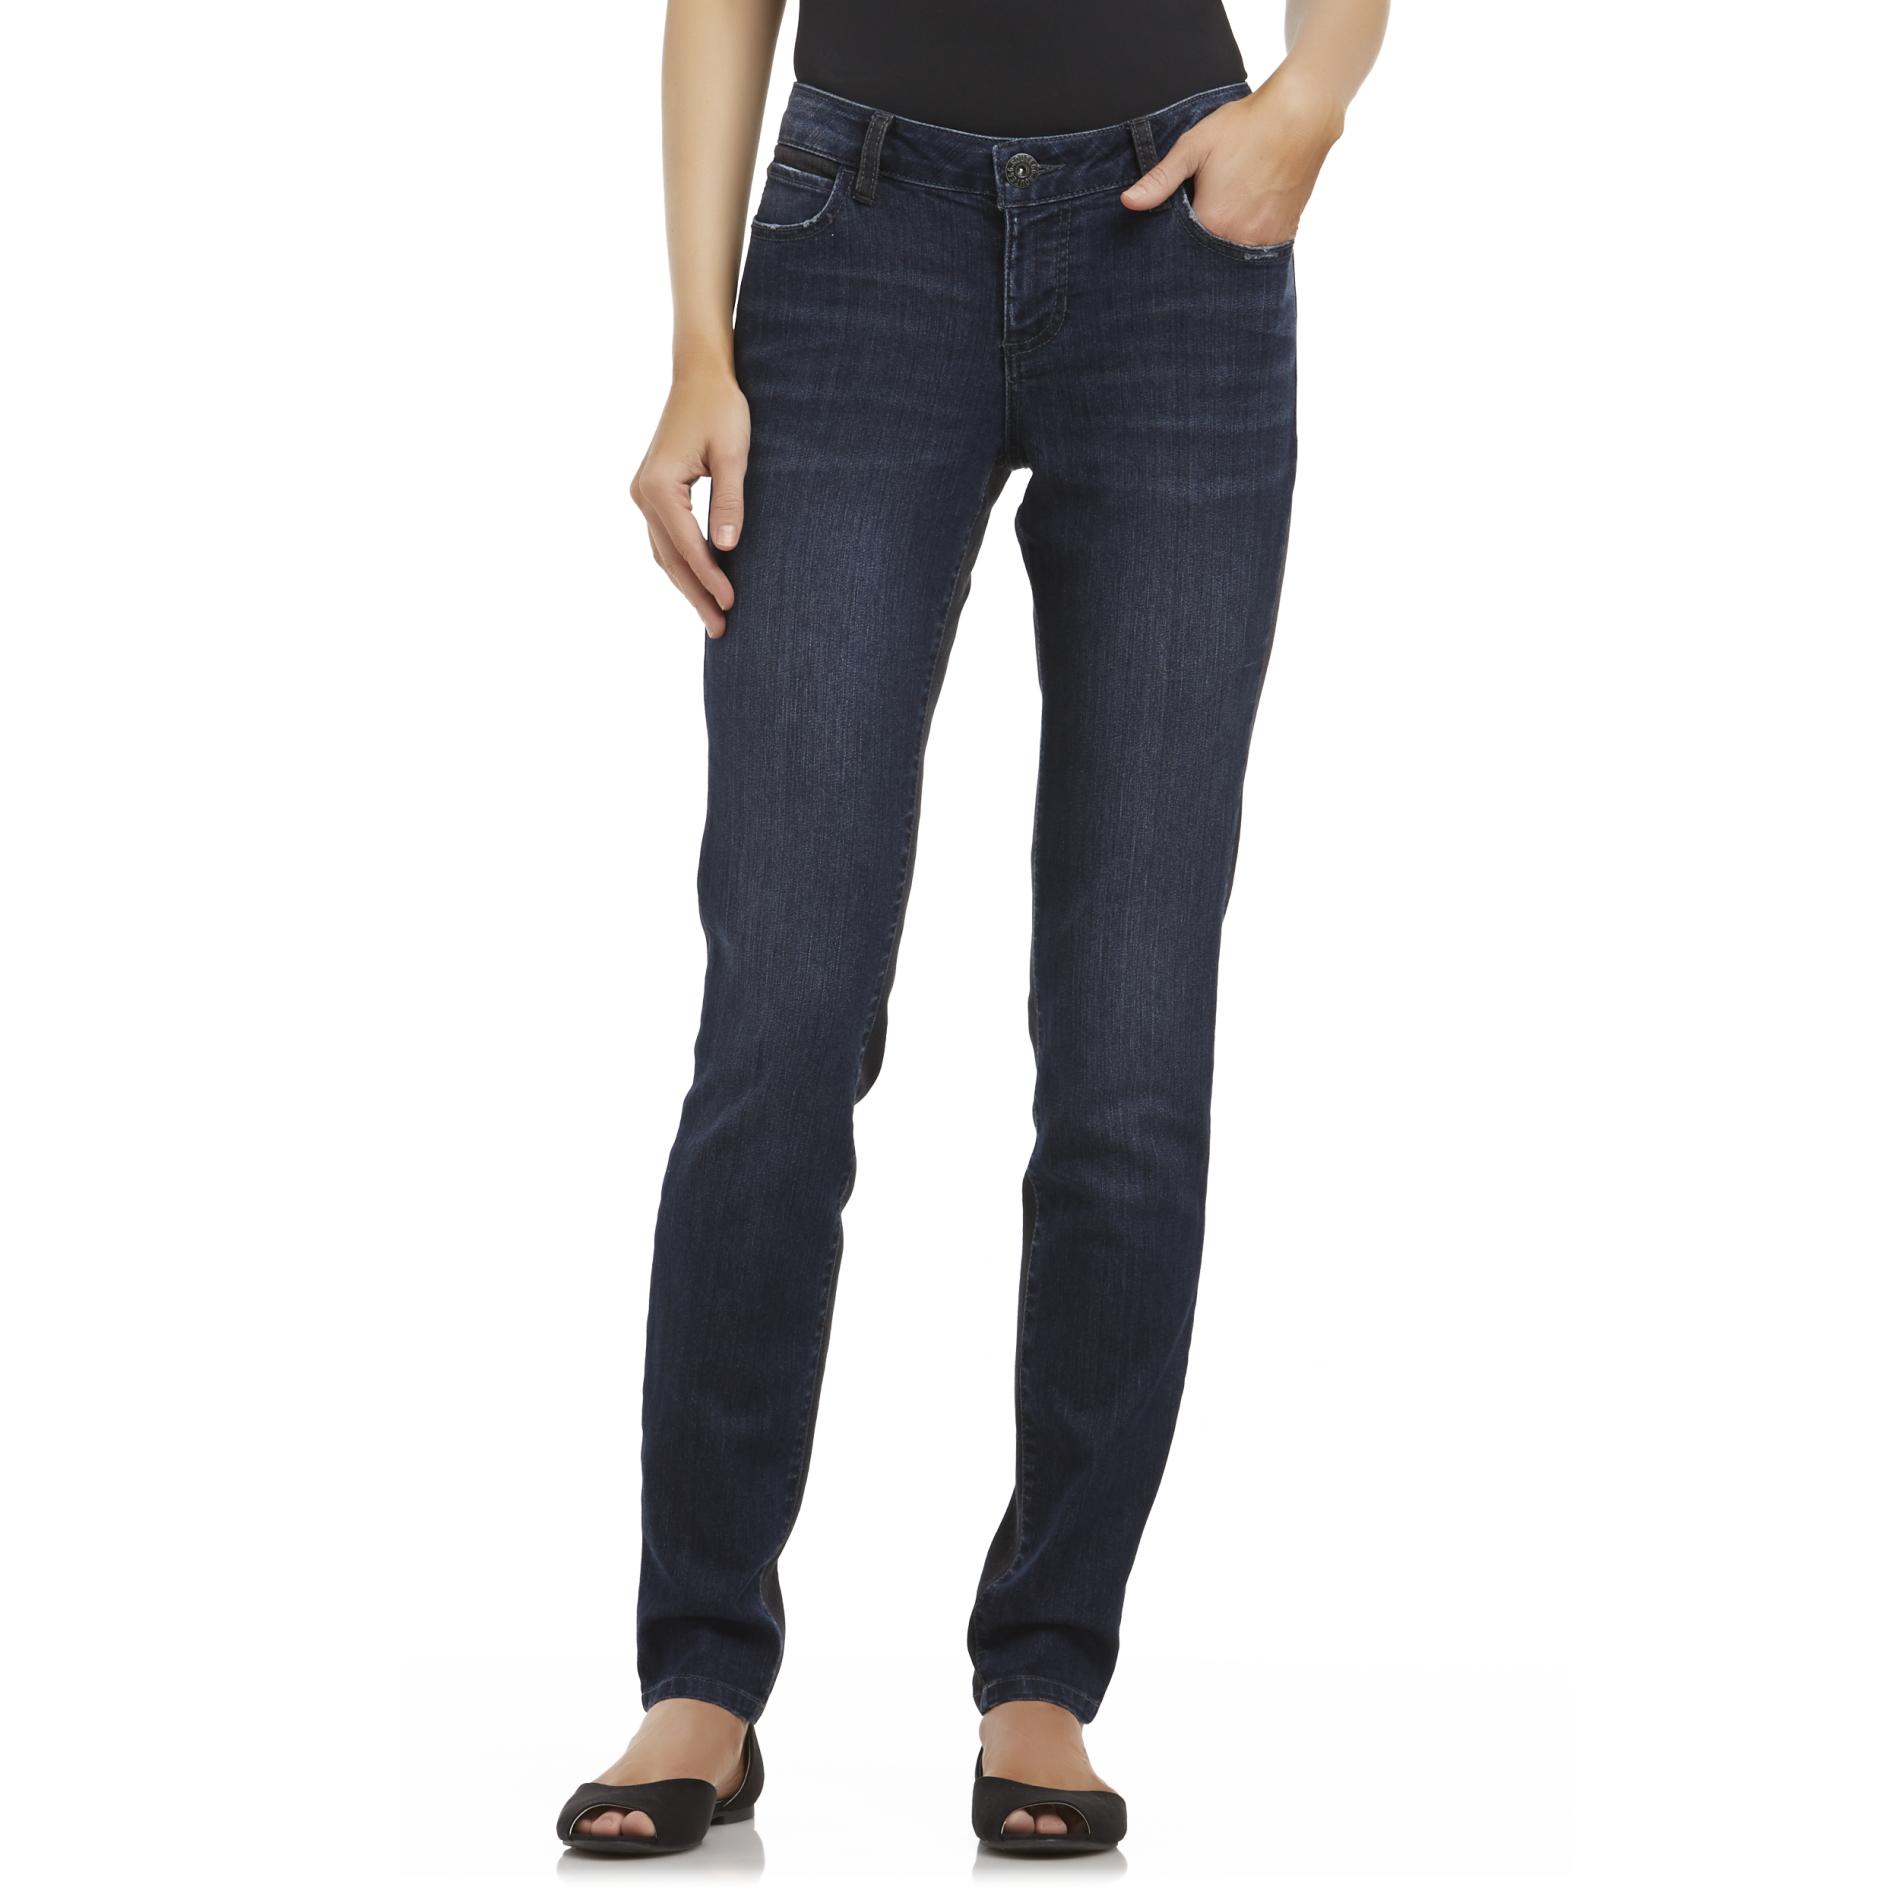 Route 66 Women's Skinny Jeans - Colorblock